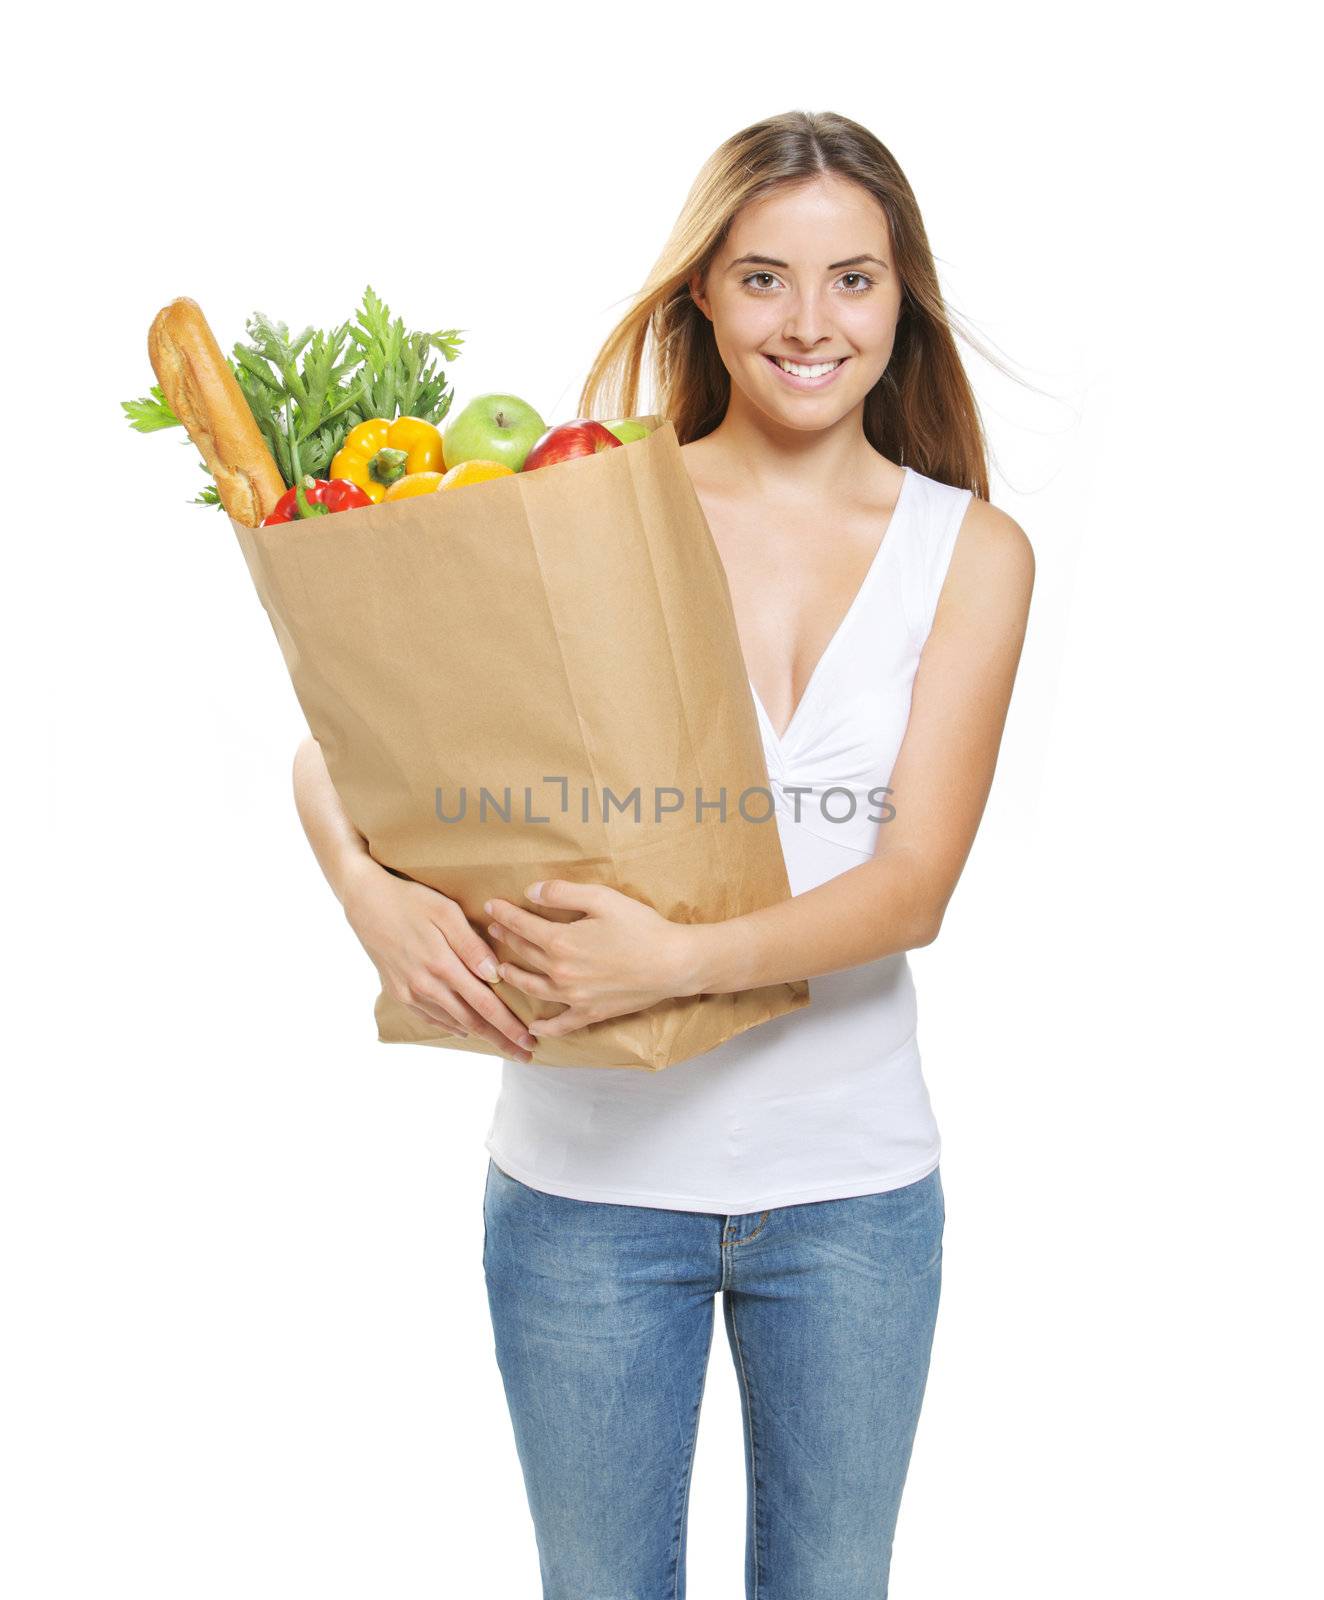 Portrait of smiling young woman holding a shopping bag full of groceries on white background